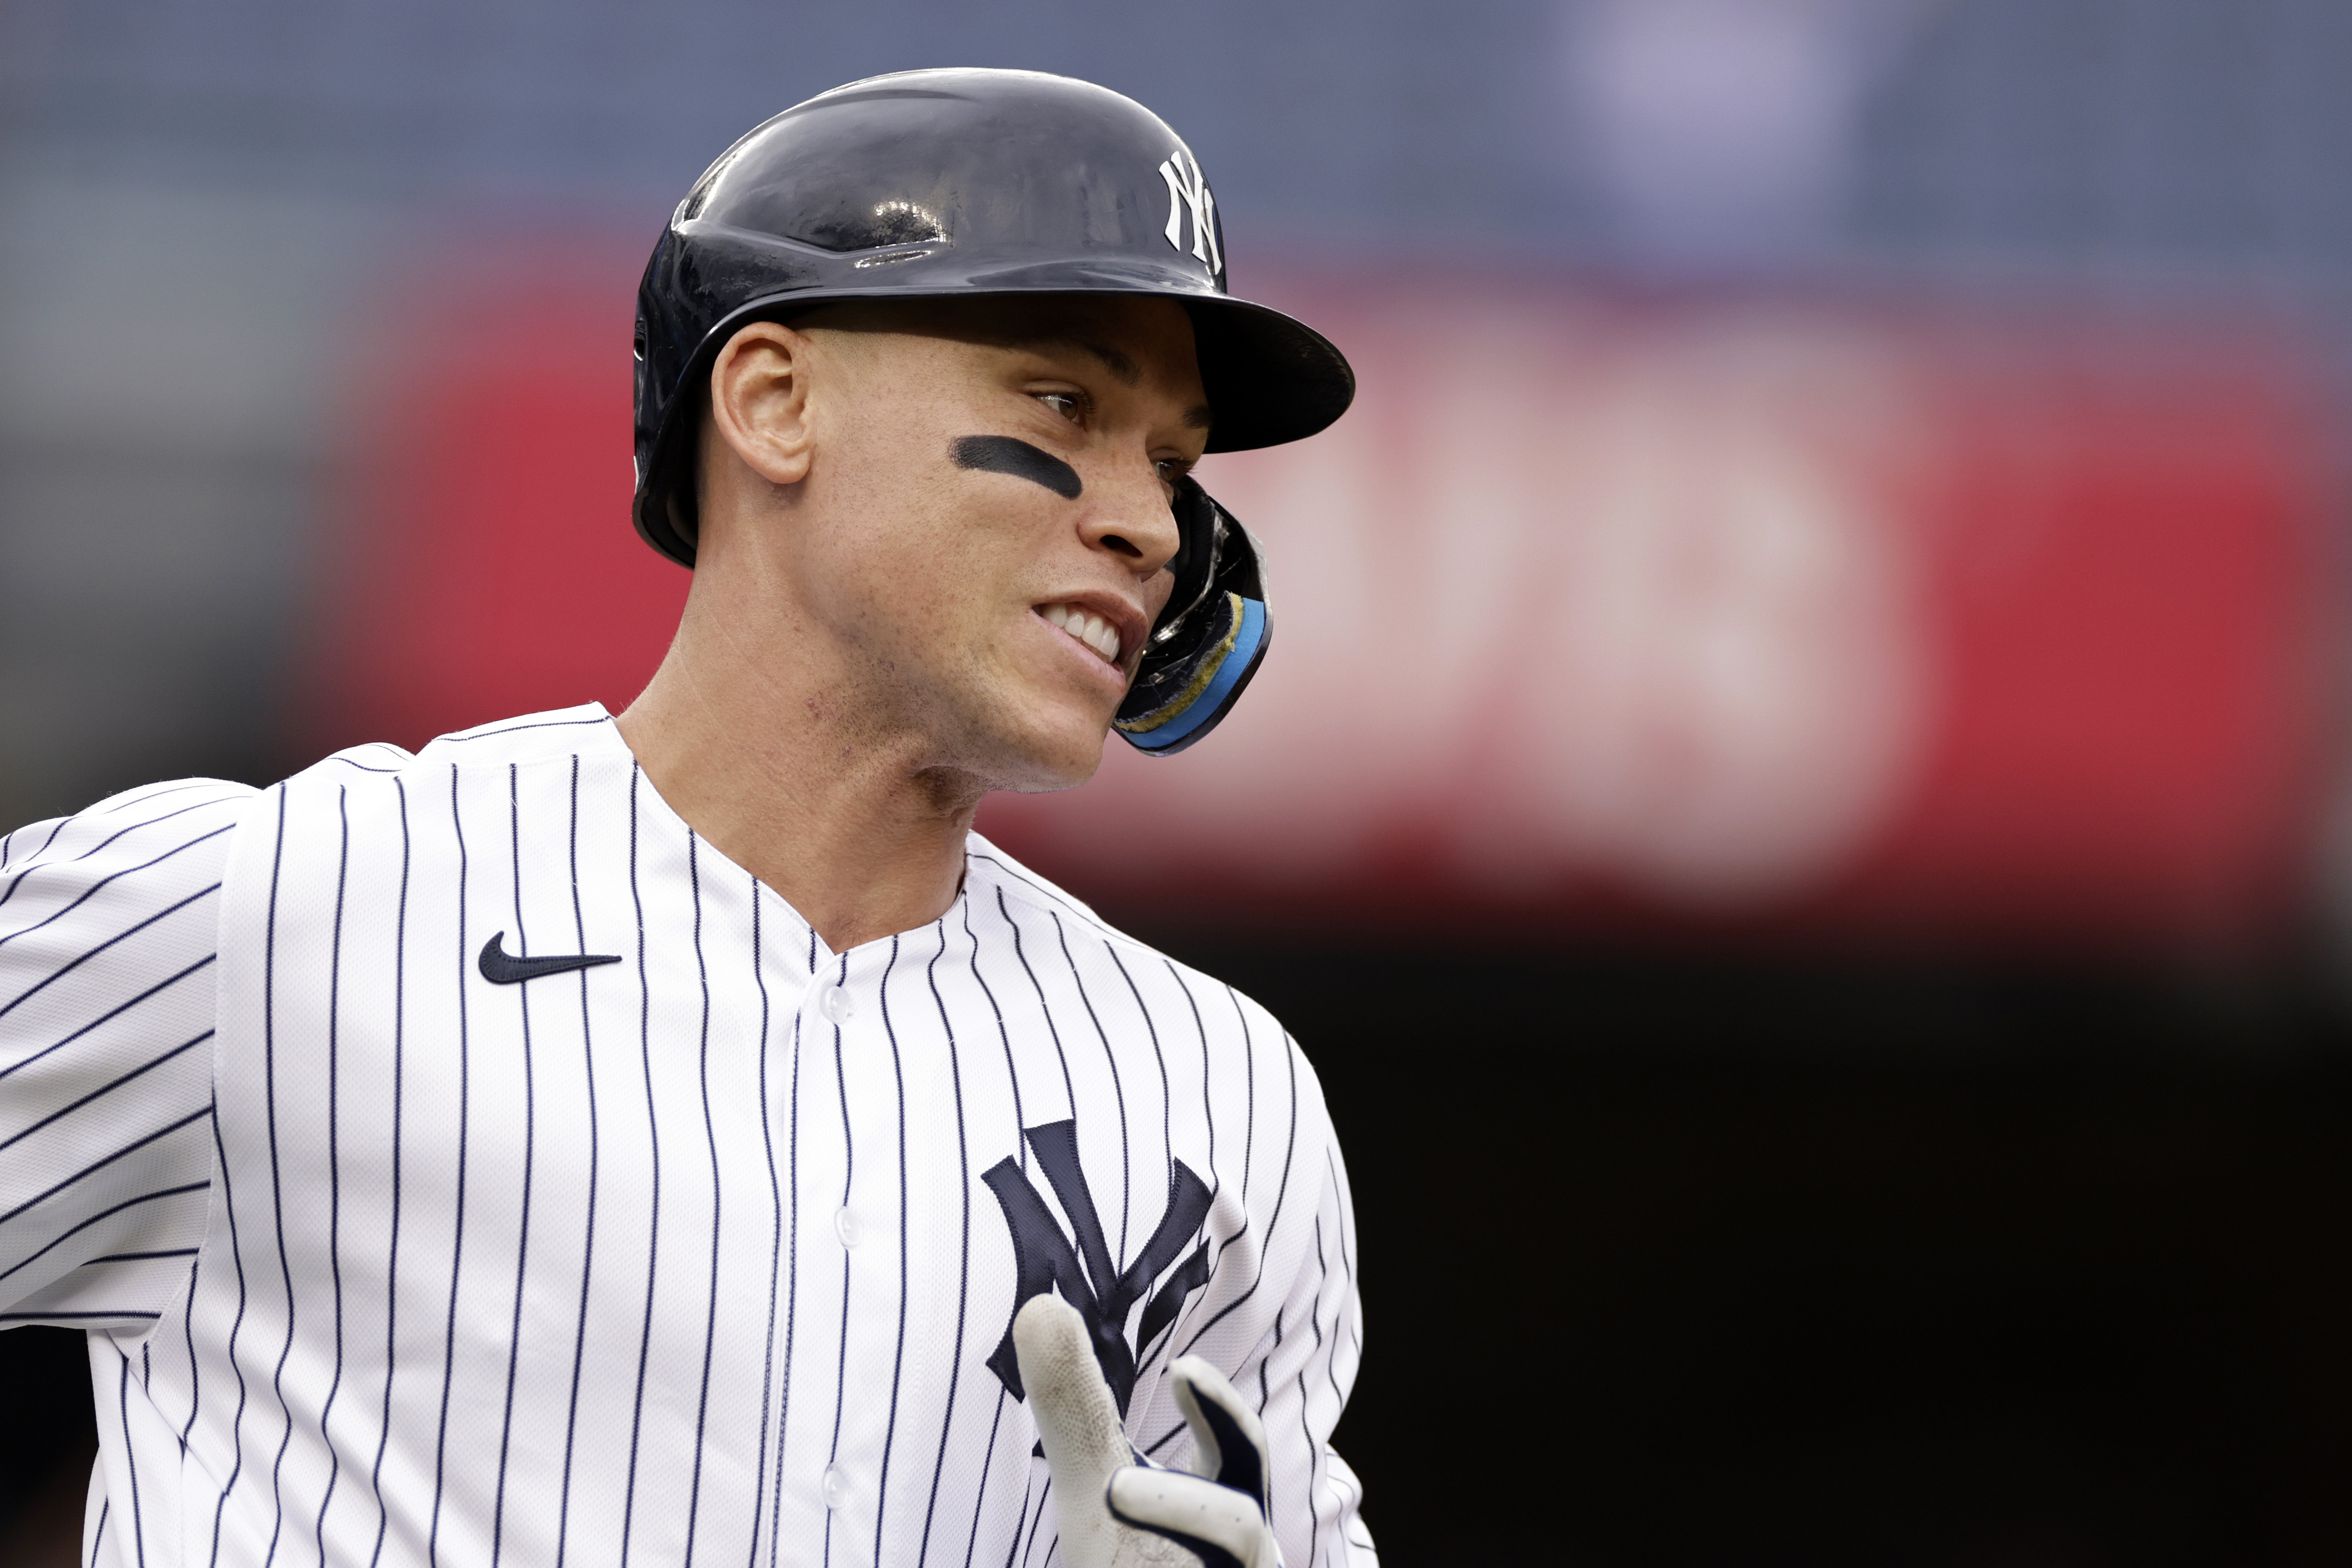 Aaron Judge, Barry Bonds, Babe Ruth; who is baseball's real home